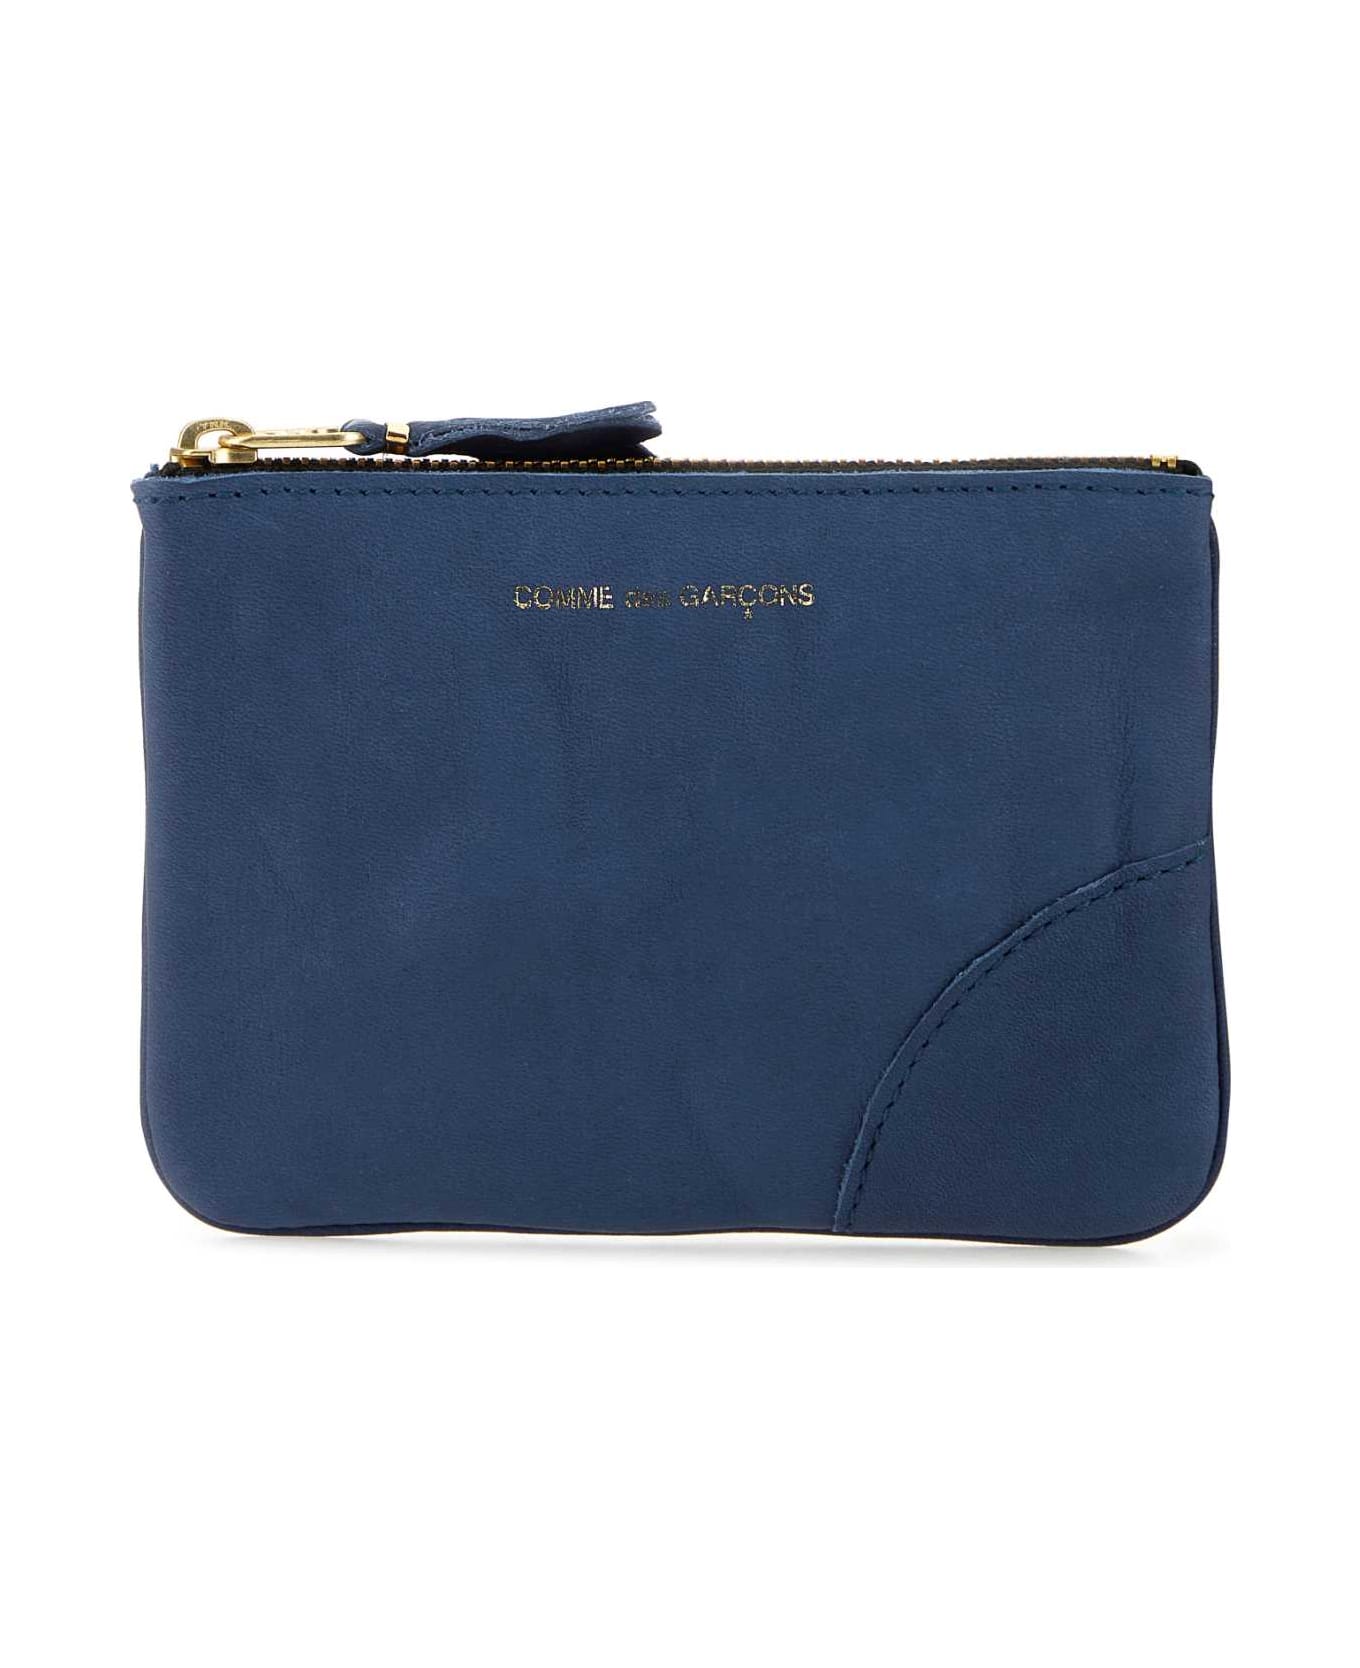 Comme des Garçons Blue Leather Pouch - NAVY クラッチバッグ